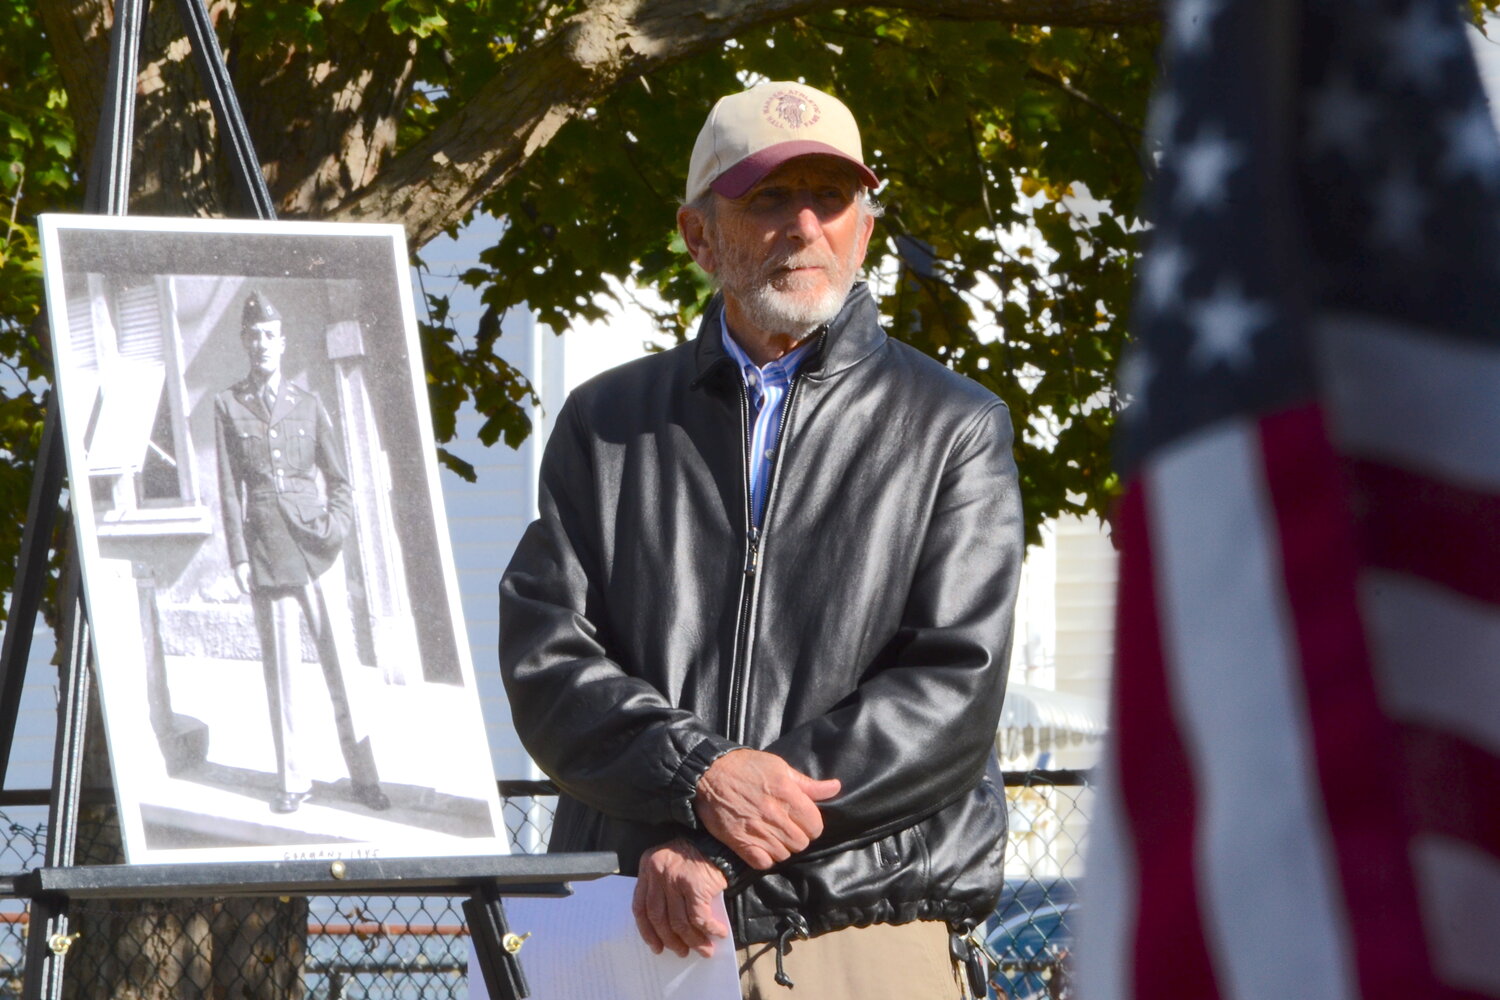 Lester ‘Butch’ Lombardi Jr. stands beside a portrait of his late father, Lester L. Lombardi, who would rise to the rank of captain while on active duty and became a company commander with the U.S. Army during World War II.